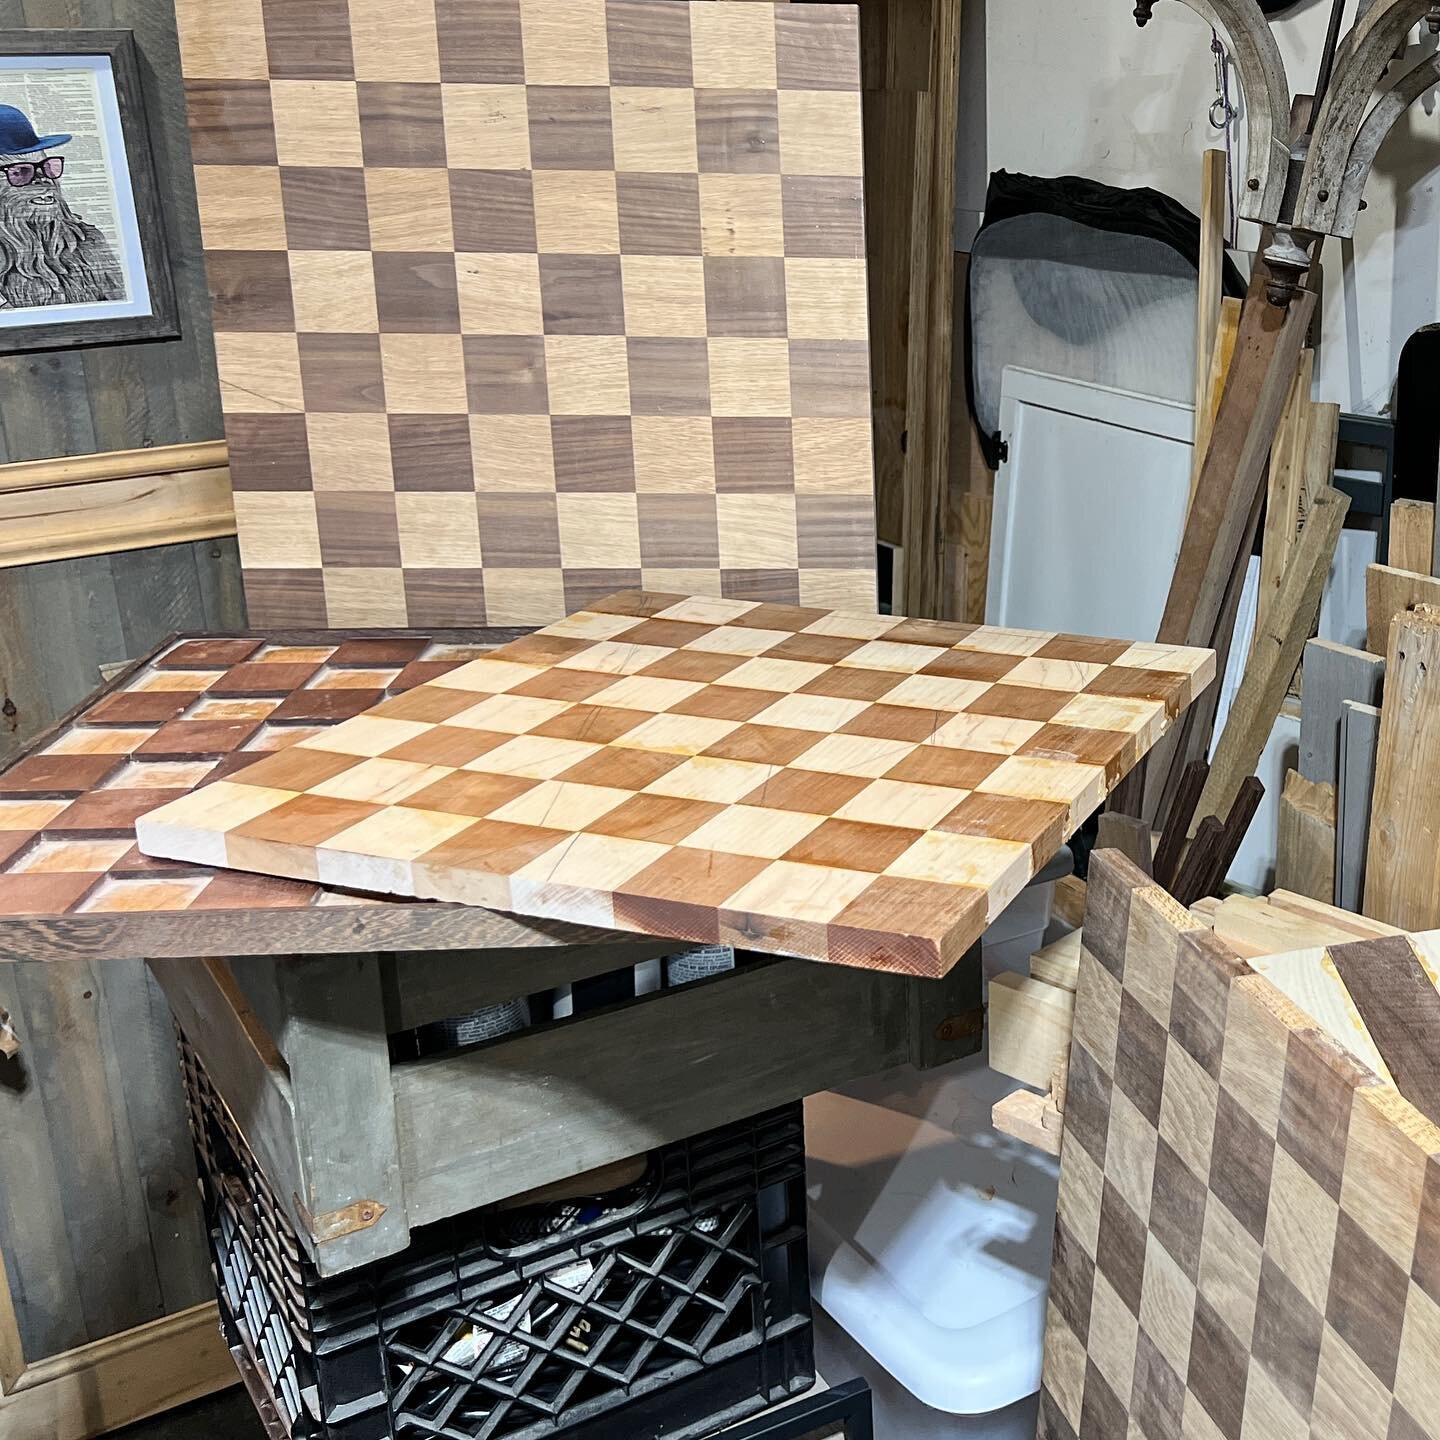 Tickets now online! Chessboard making class July 29 6p-9p #woodworkingclub #mastercraftsmanclub #mastercraftsman #woodworkingfestival #craftsman #artists #workshop #maker #woodcarving #woodturning #woodburning #pyrography #chessboard #tools #furnitur